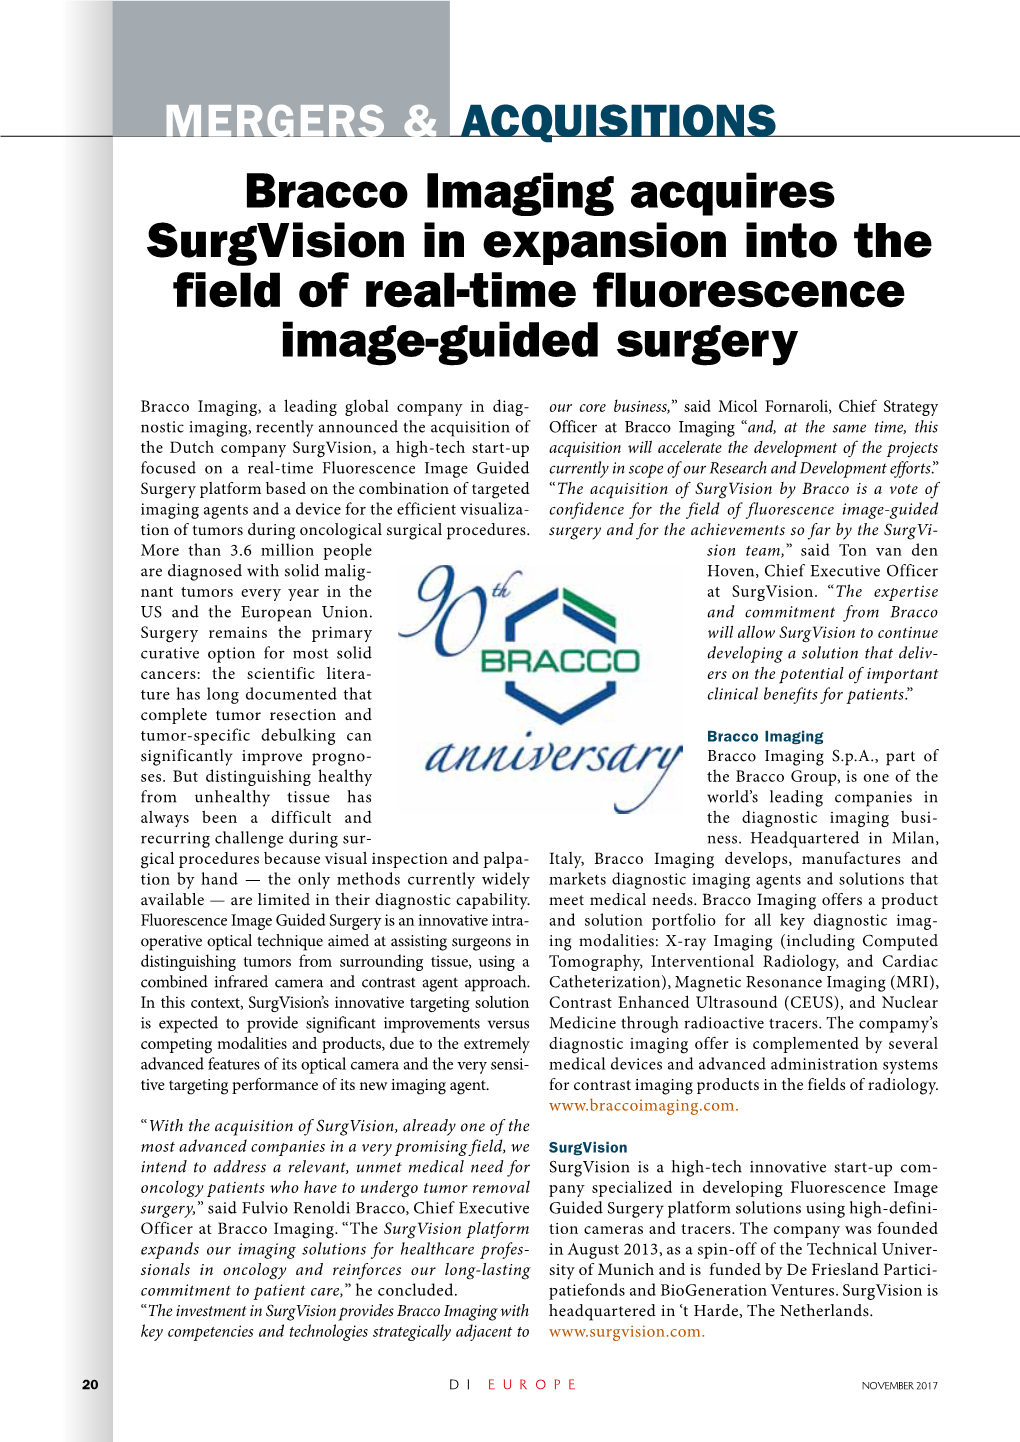 Bracco Imaging Acquires Surgvision in Expansion Into the Field of Real-Time Fluorescence Image-Guided Surgery